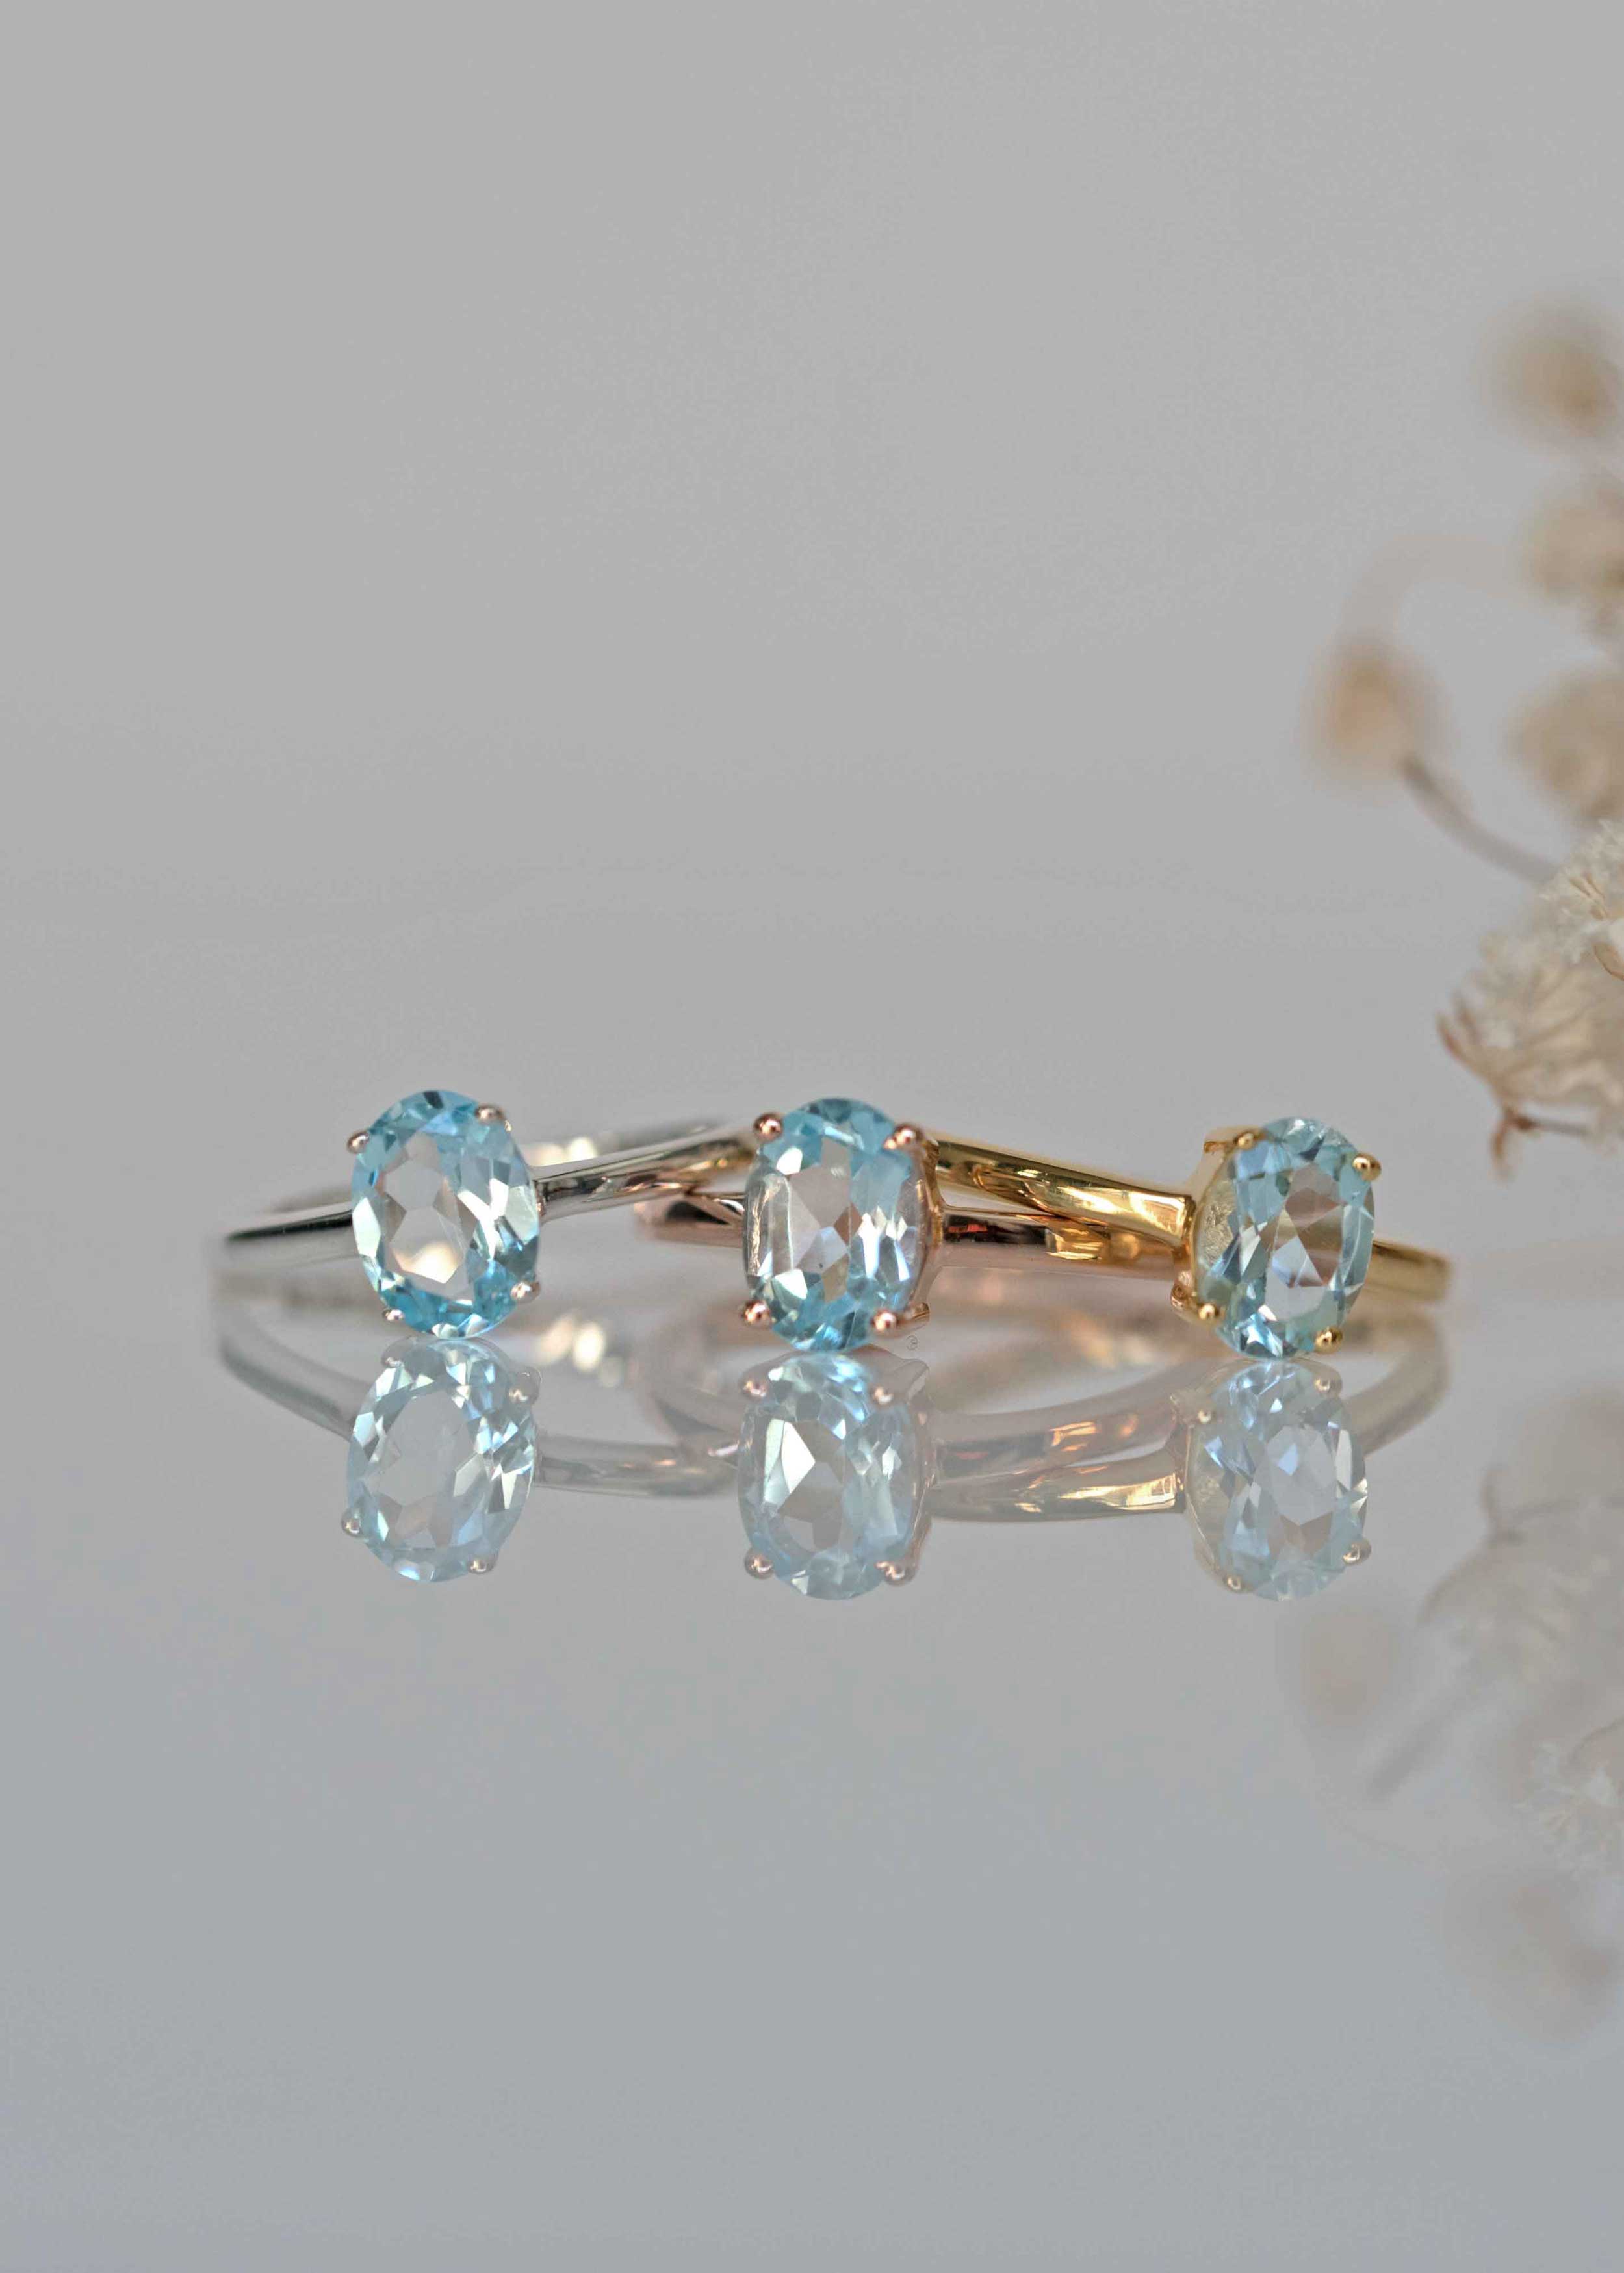 Blue Topaz Sterling Silver Stacking Stackable Rings